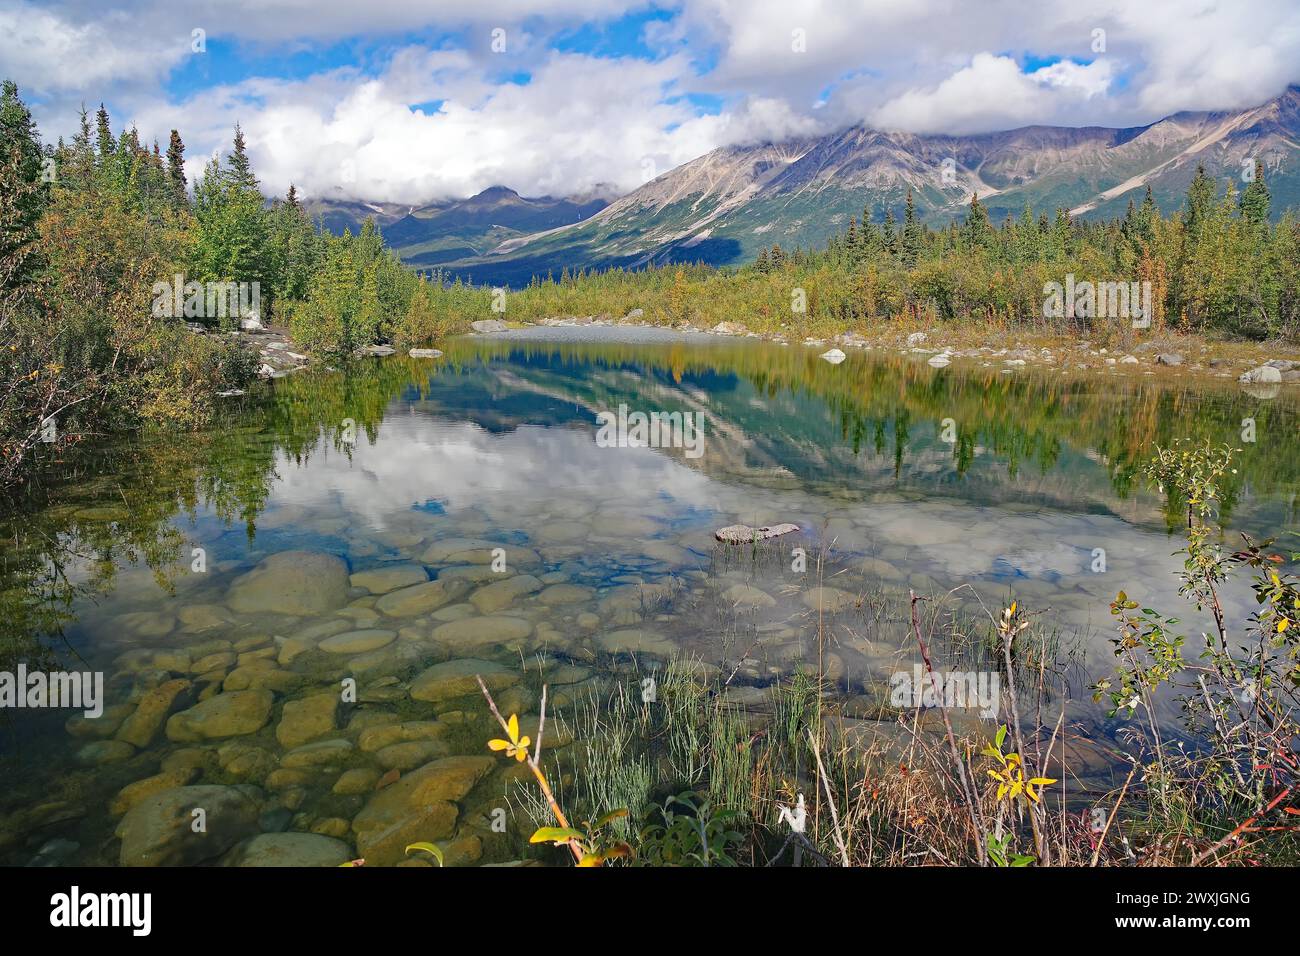 Crystal clear lake reflecting trees and mountains, autumn atmosphere, calendar picture, Copper River Census, Wrangell-St. Elias National Park Stock Photo